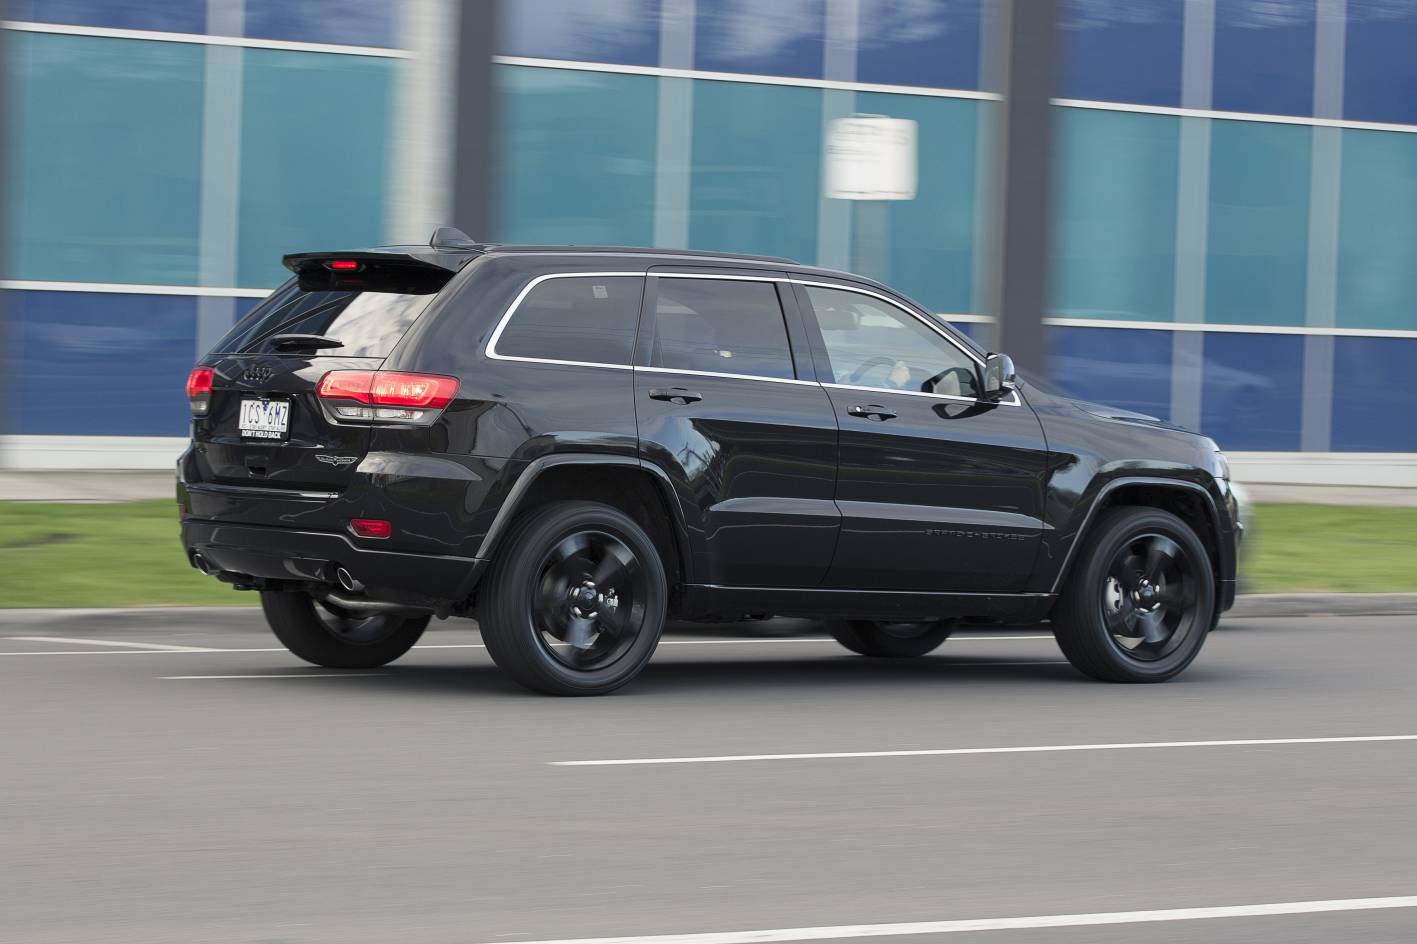 Jeep Cars News Blackhawk Edition Models To Boost Range Appeal